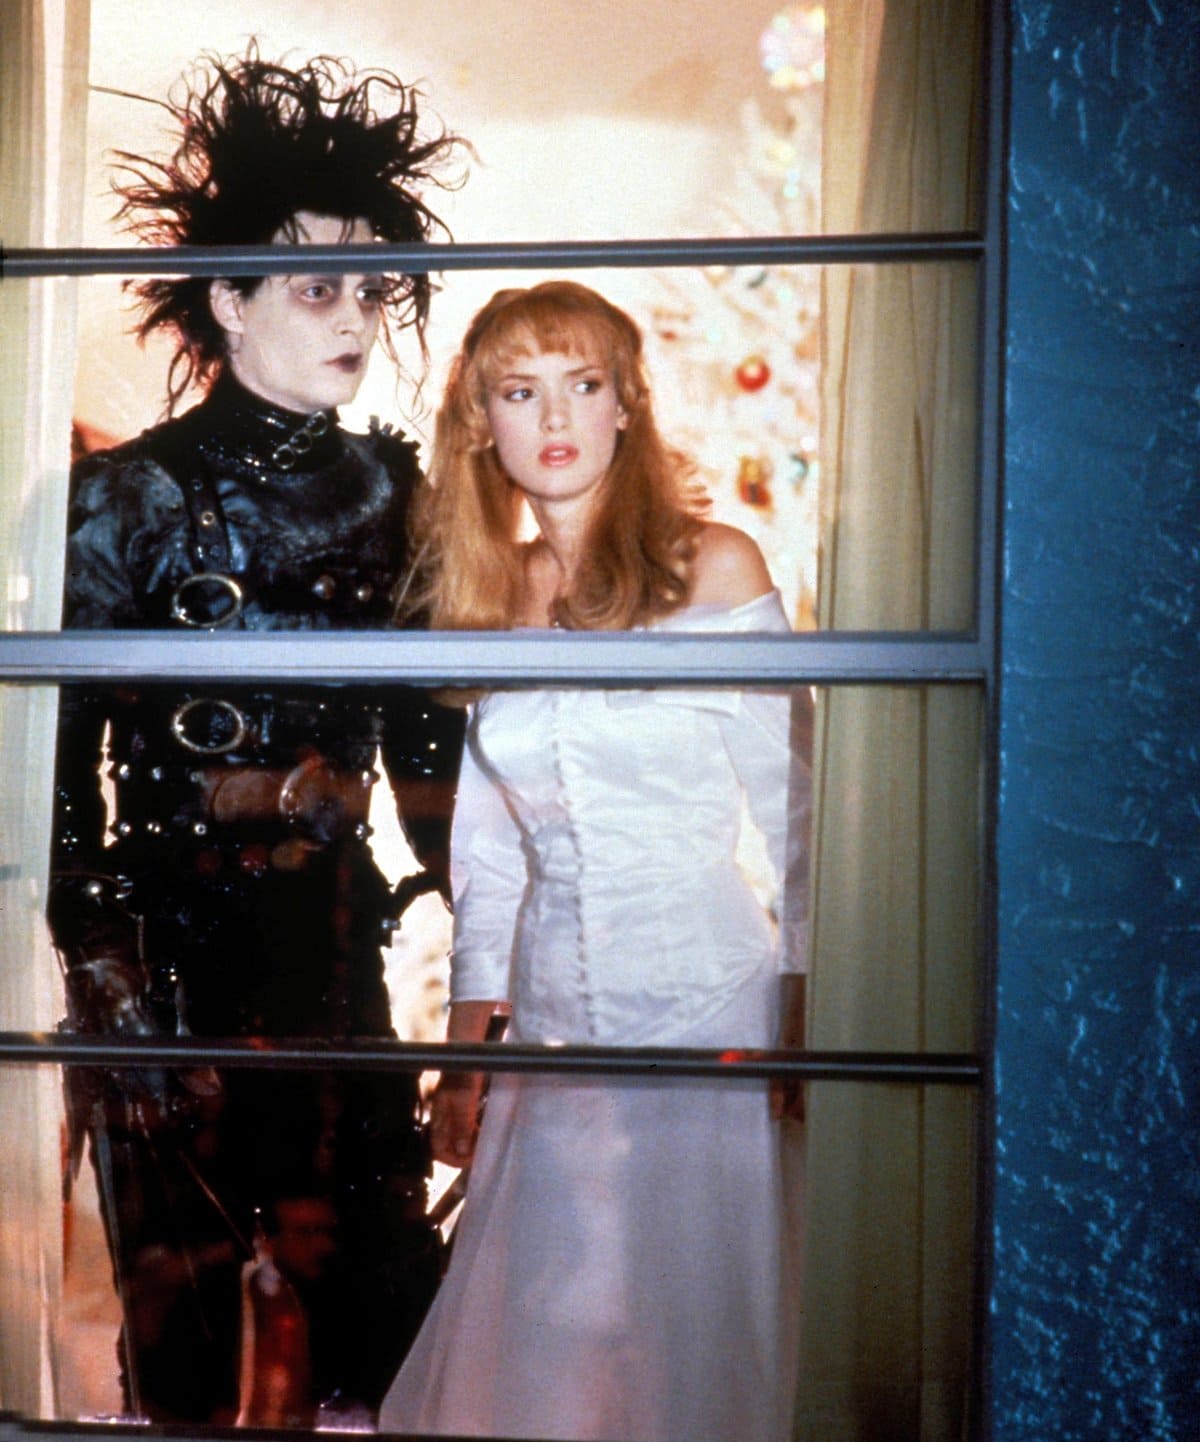 Edward Scissorhands co-stars Winona Ryder and Johnny Depp dated for four years from 1989 to 1993